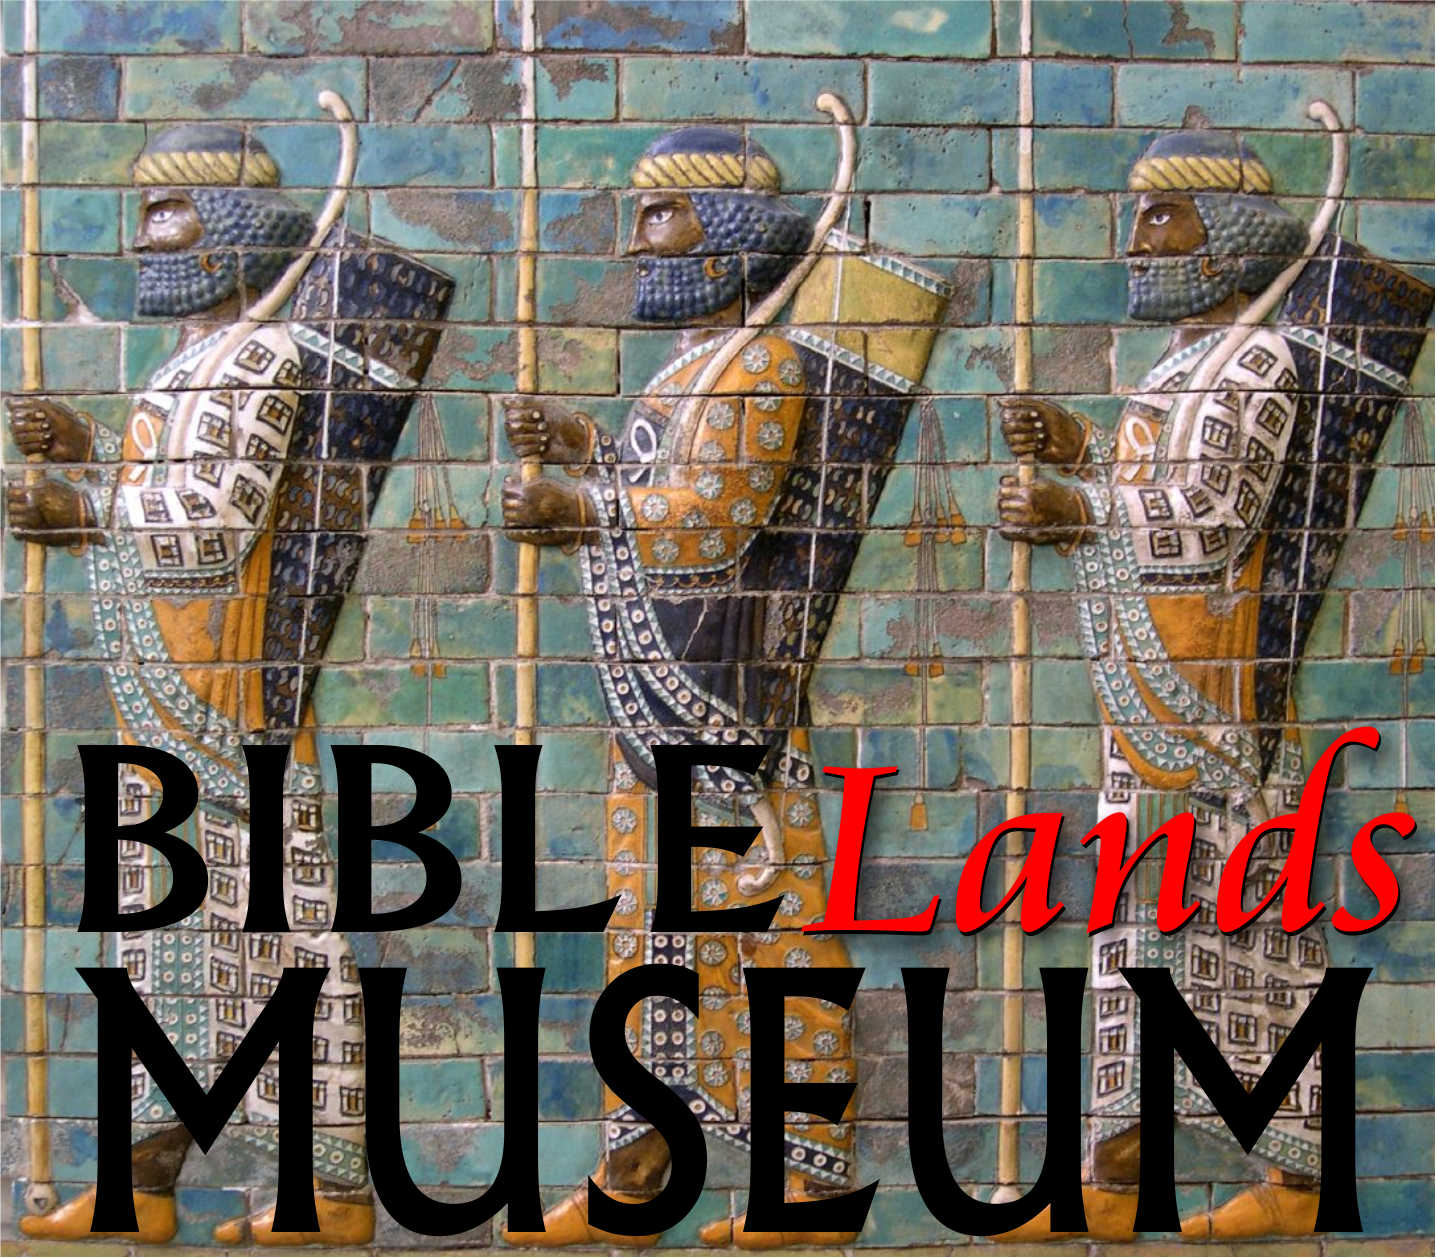 COMPLIMENTARY BIBLE LANDS MUSEUM OPENS IN SANDY, ORE.